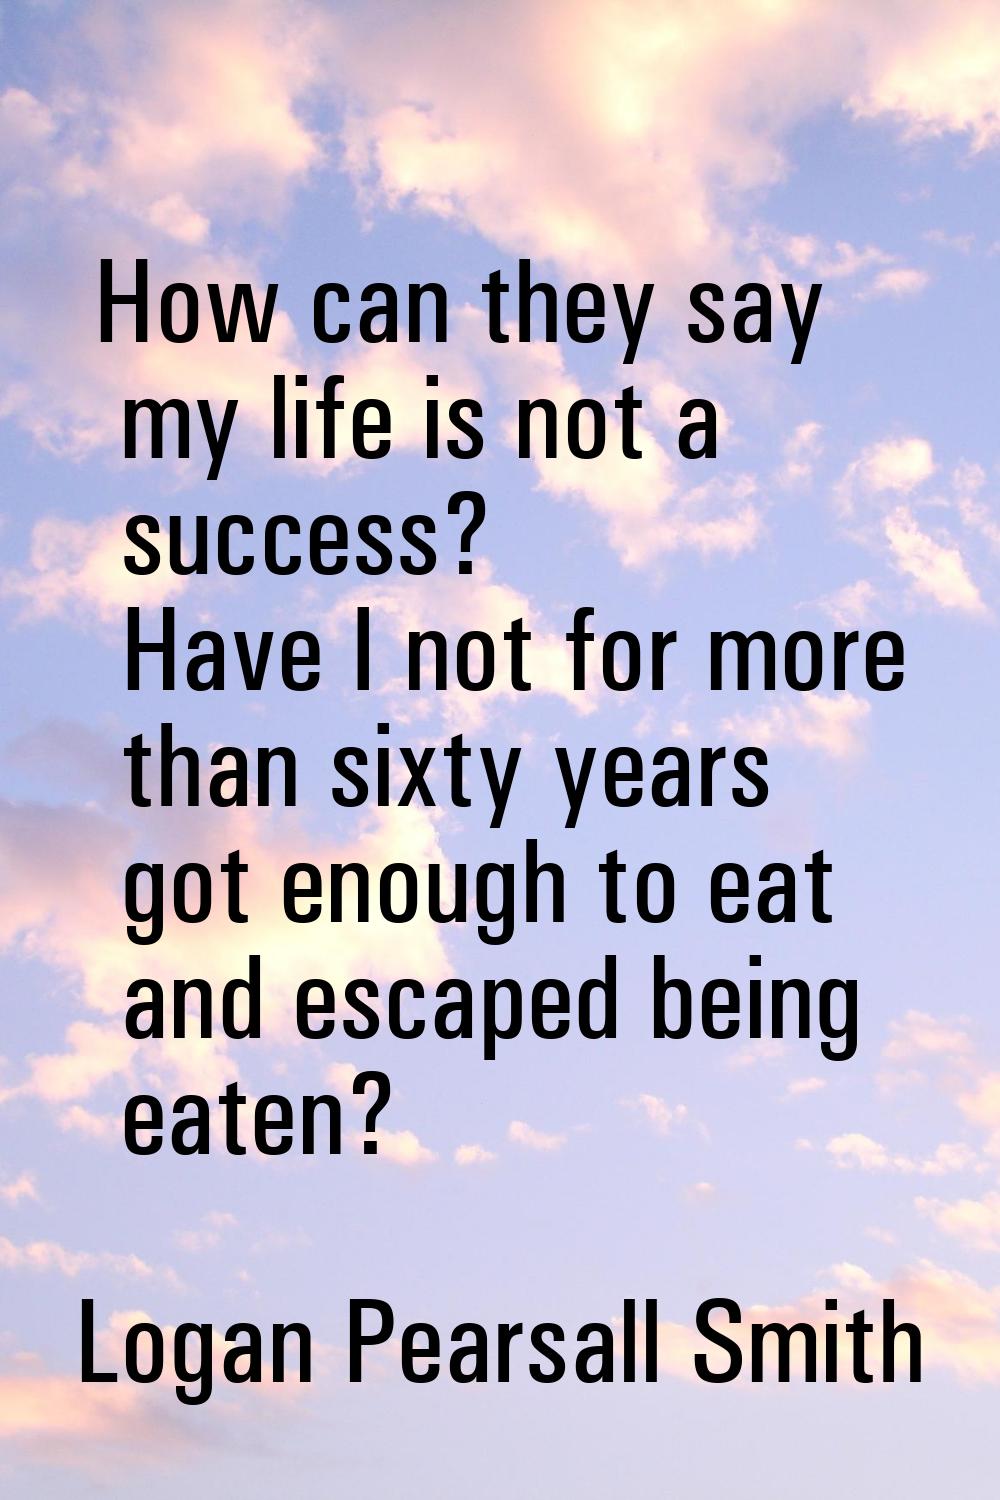 How can they say my life is not a success? Have I not for more than sixty years got enough to eat a